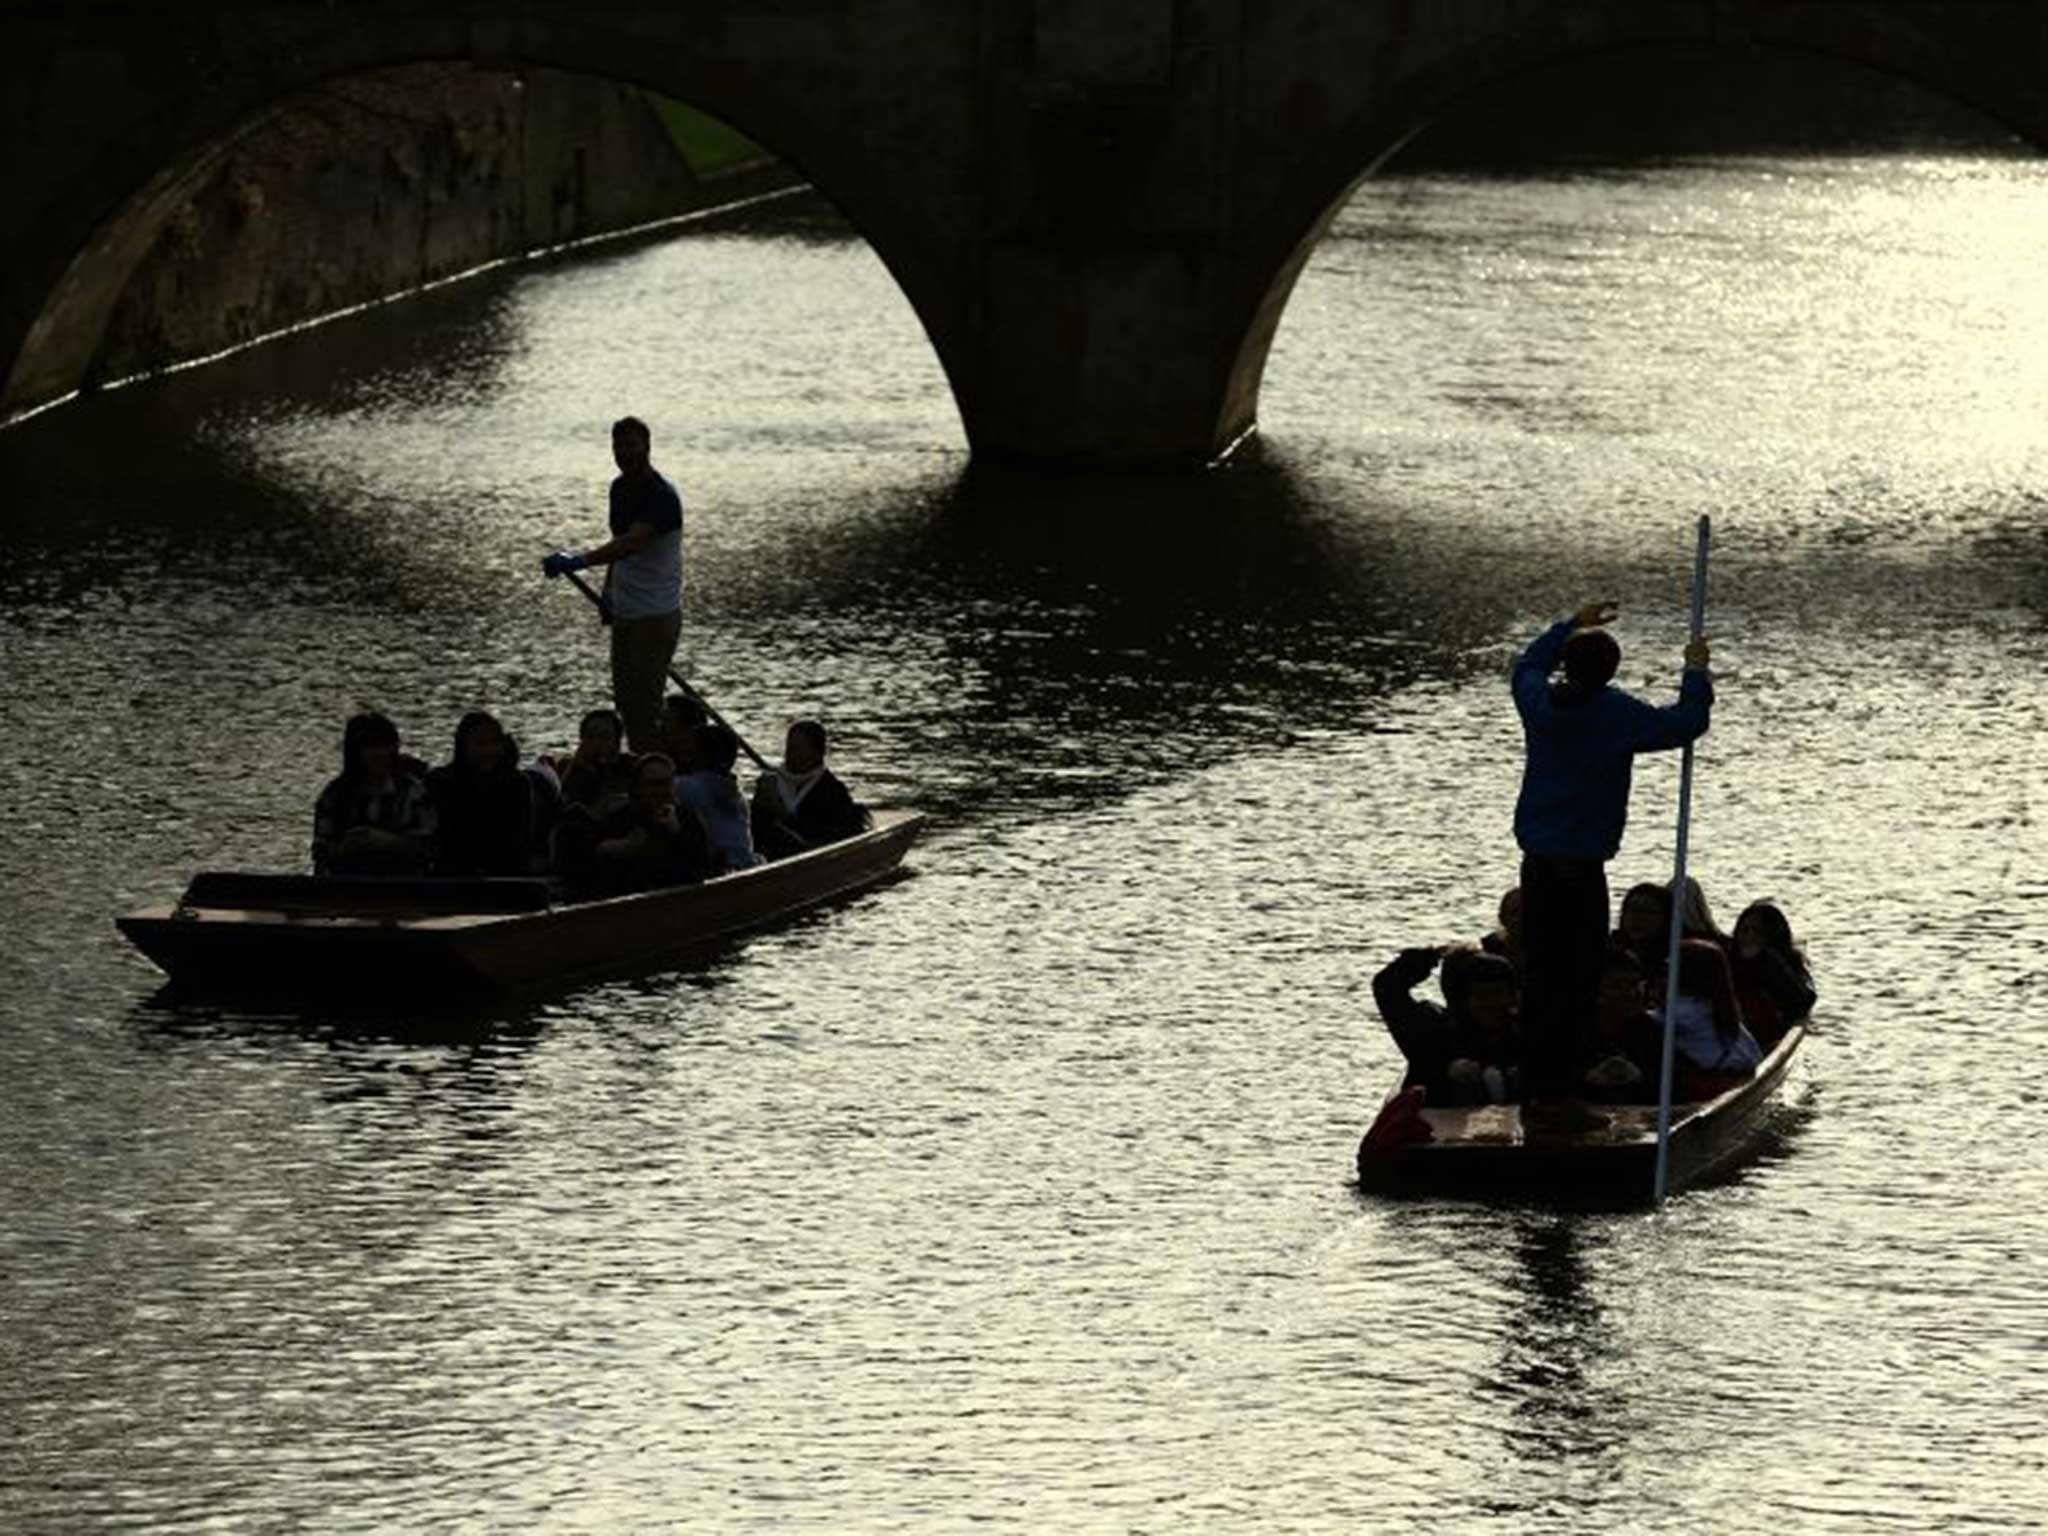 Enjoying the weather? People punt along the river in Cambridge